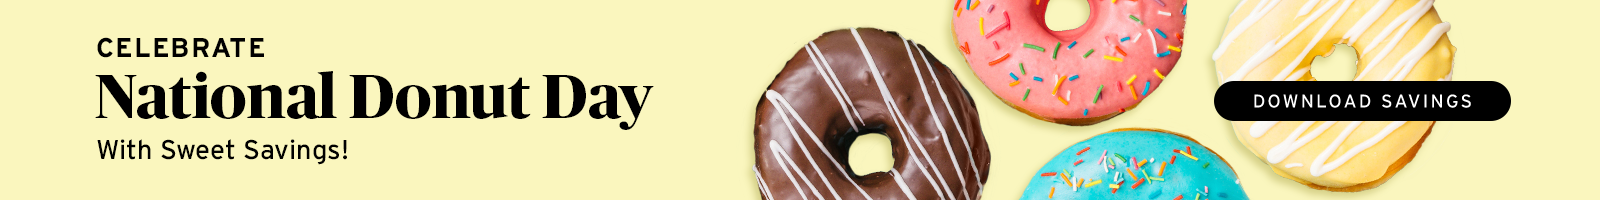 Celebrate National Donut Day with Savings